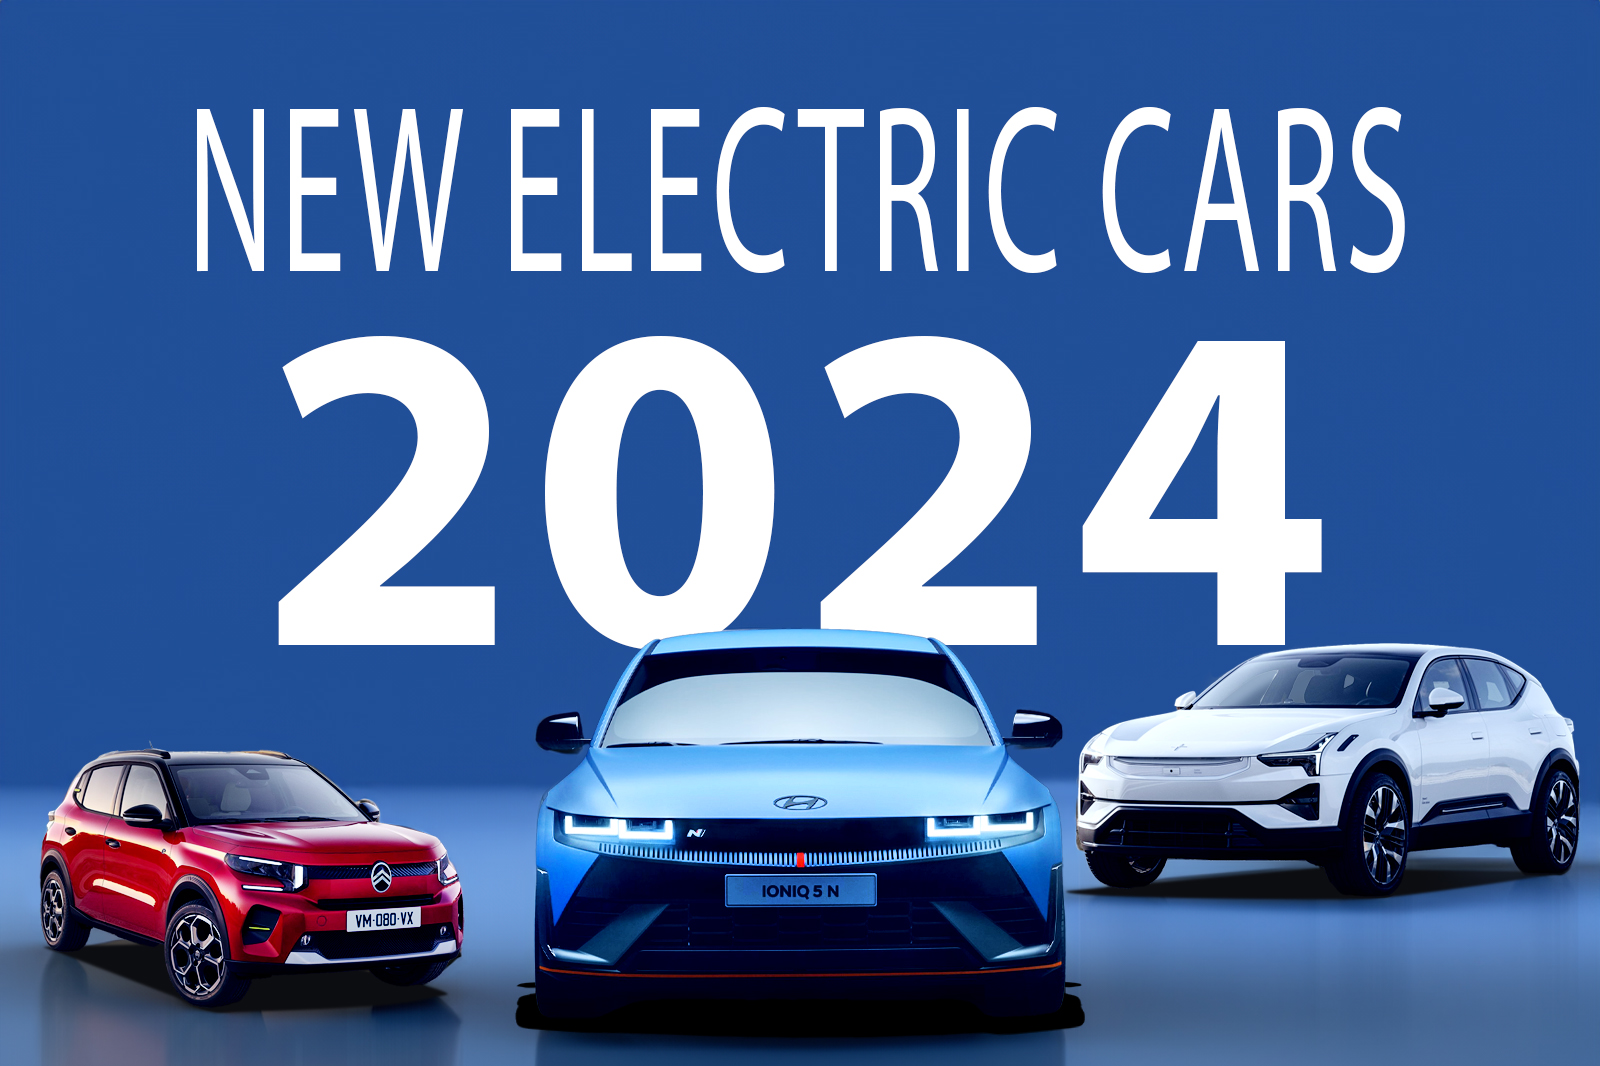 New electric cars coming in 2024